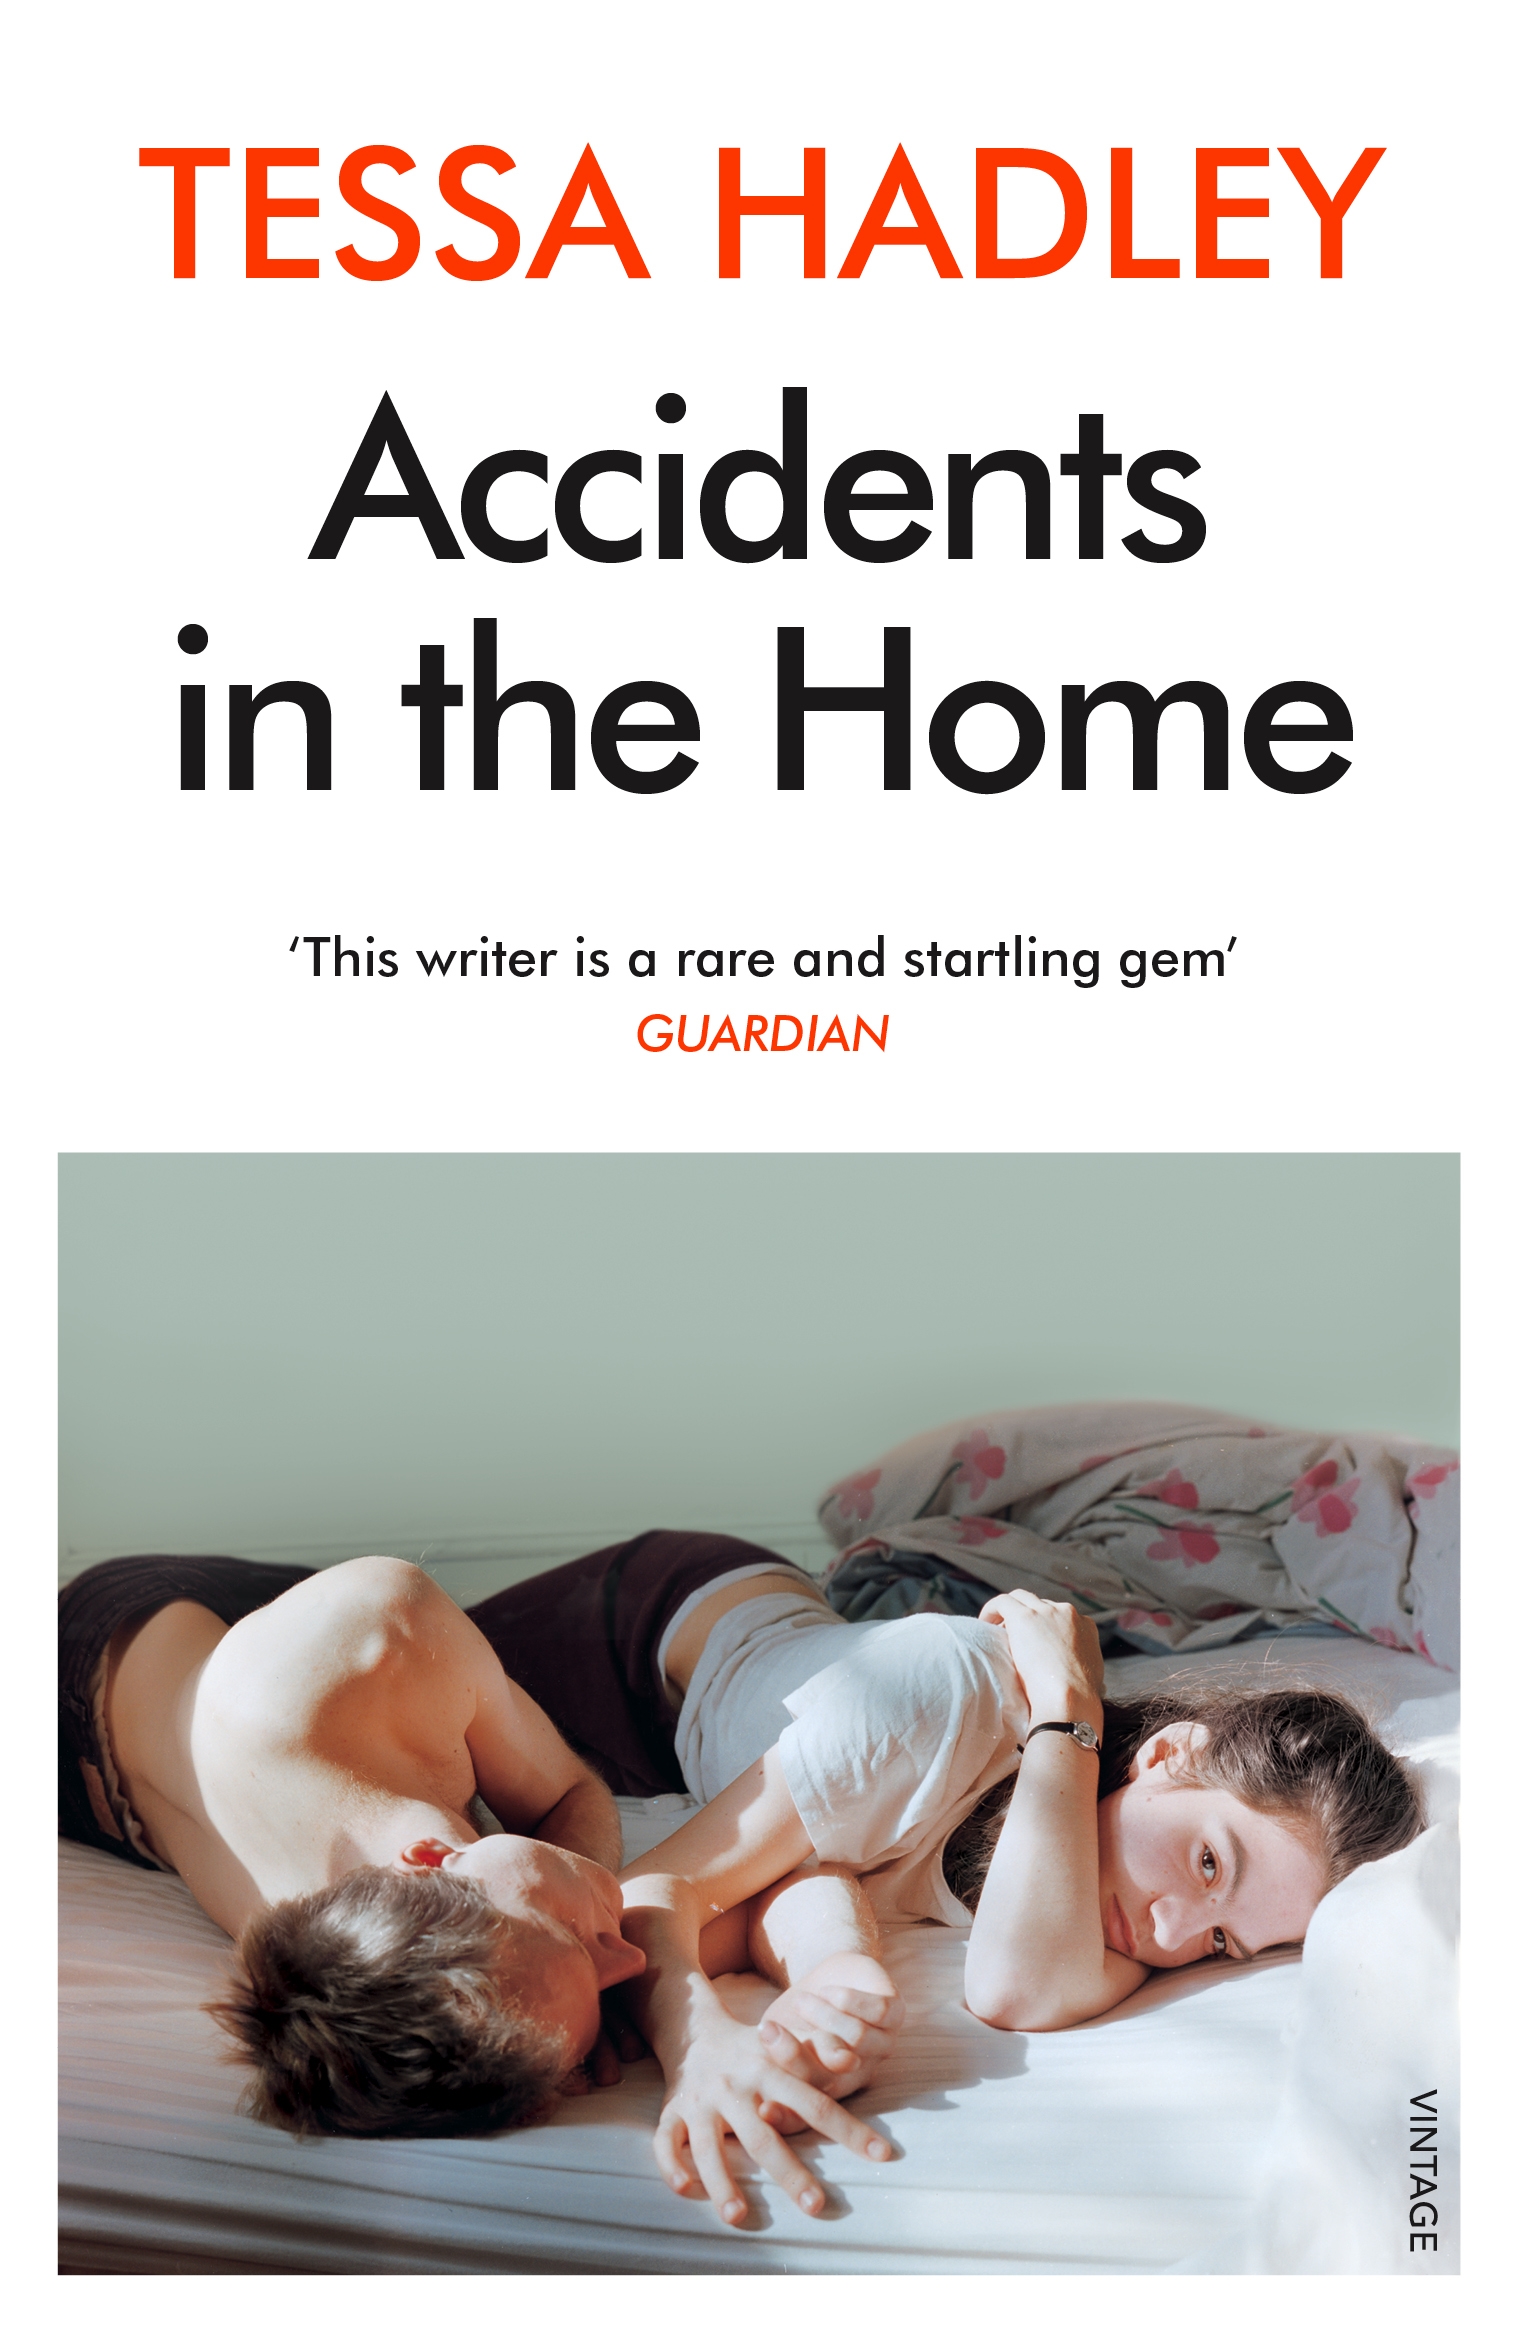 essay on home accidents